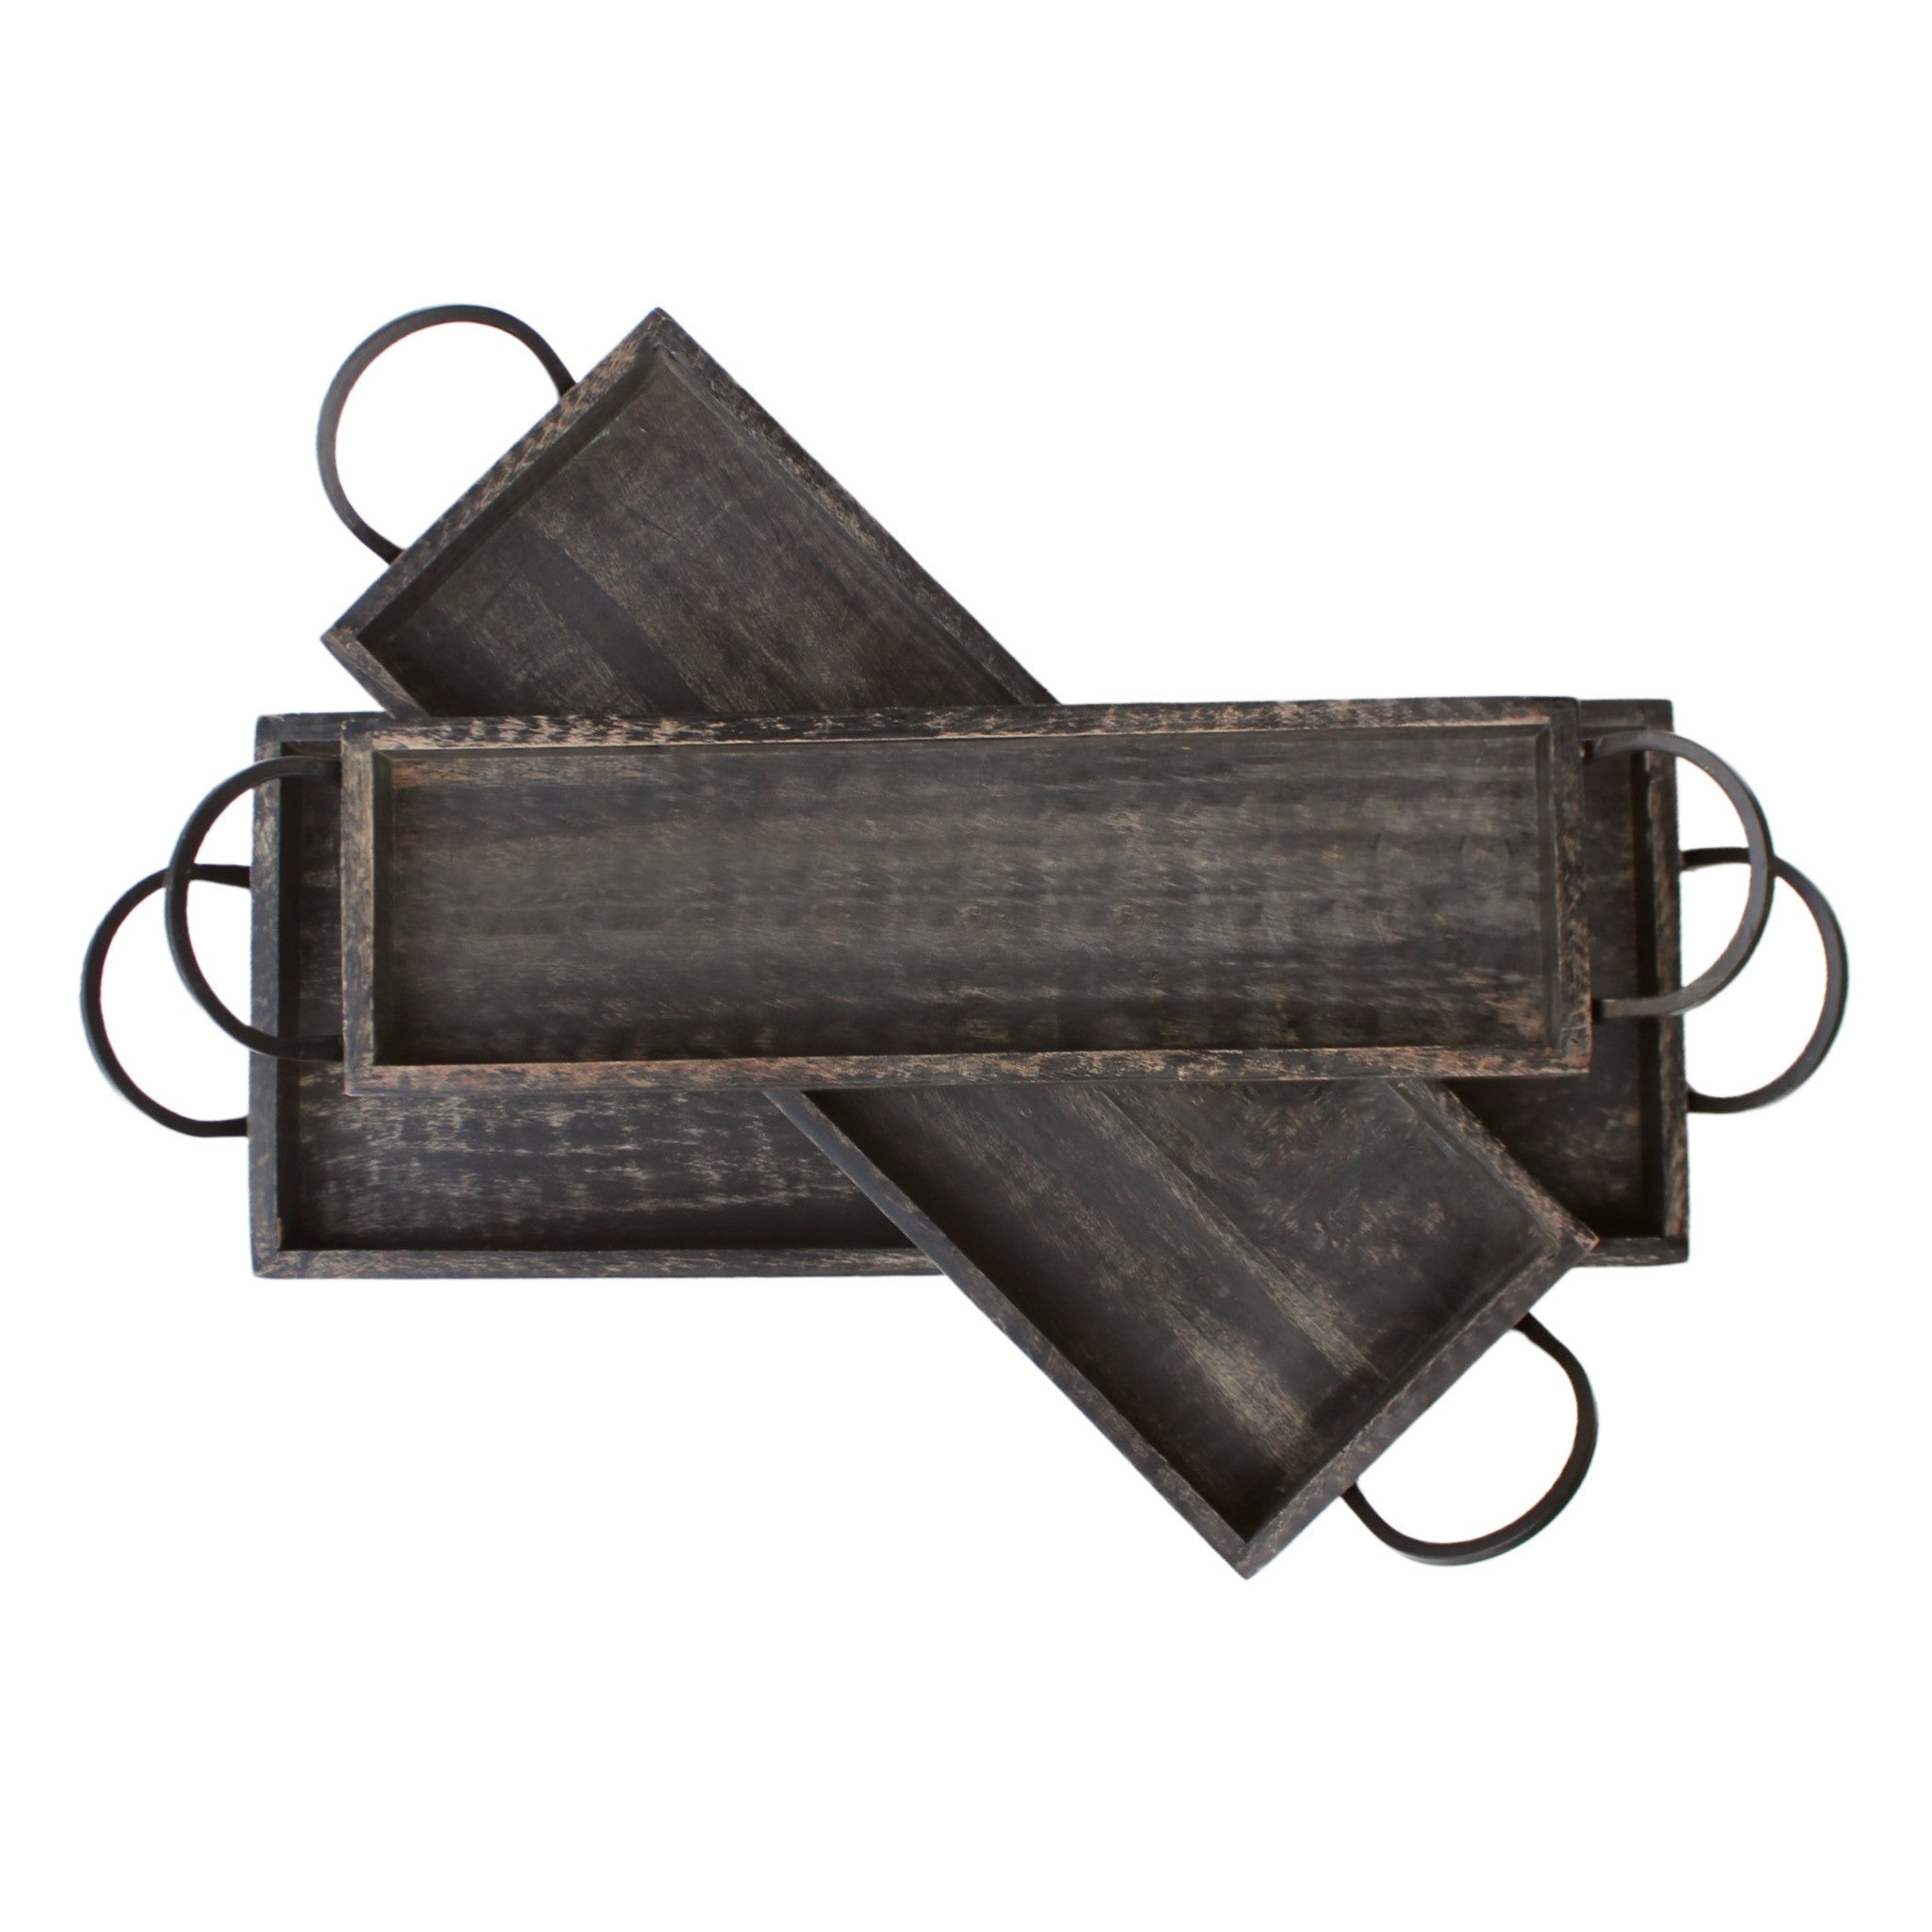 Heartwood Serving Trays in Charcoal Grey, Set of 3